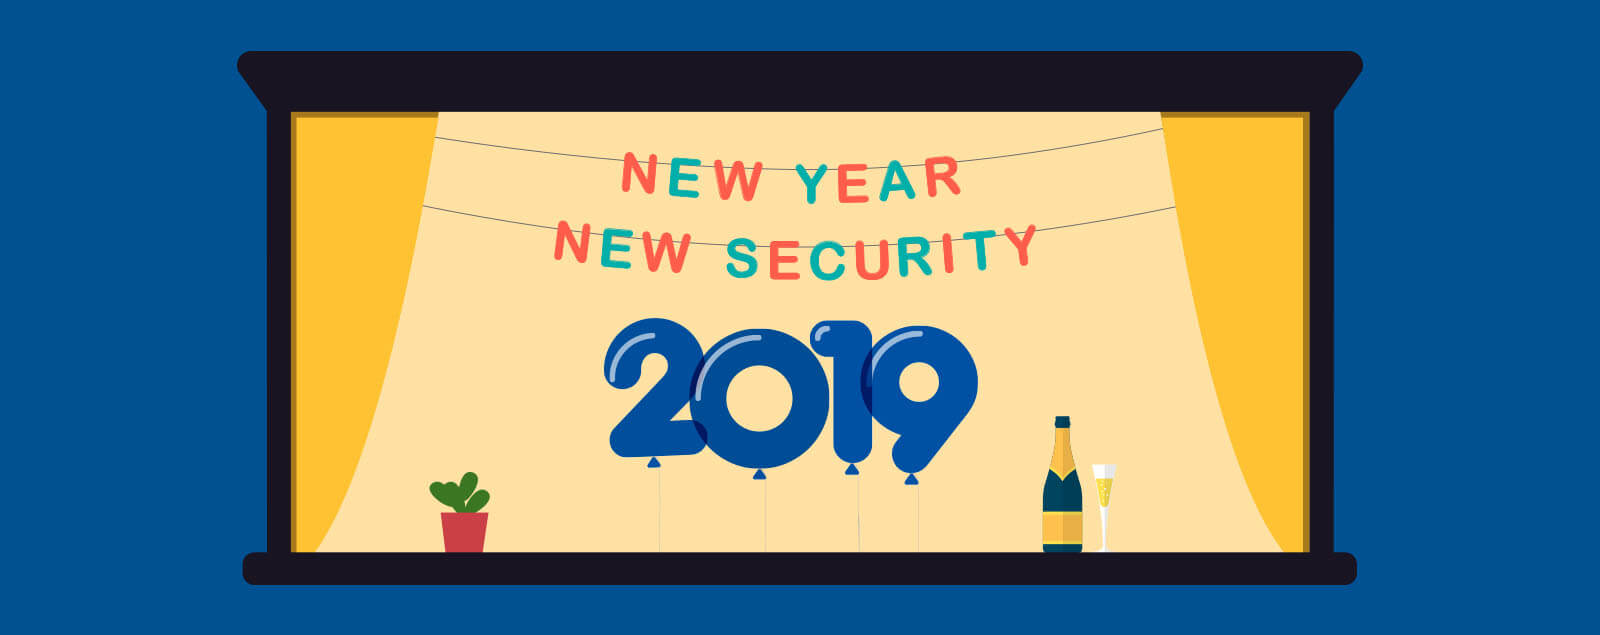 New Year new security 2019 banner in window graphic